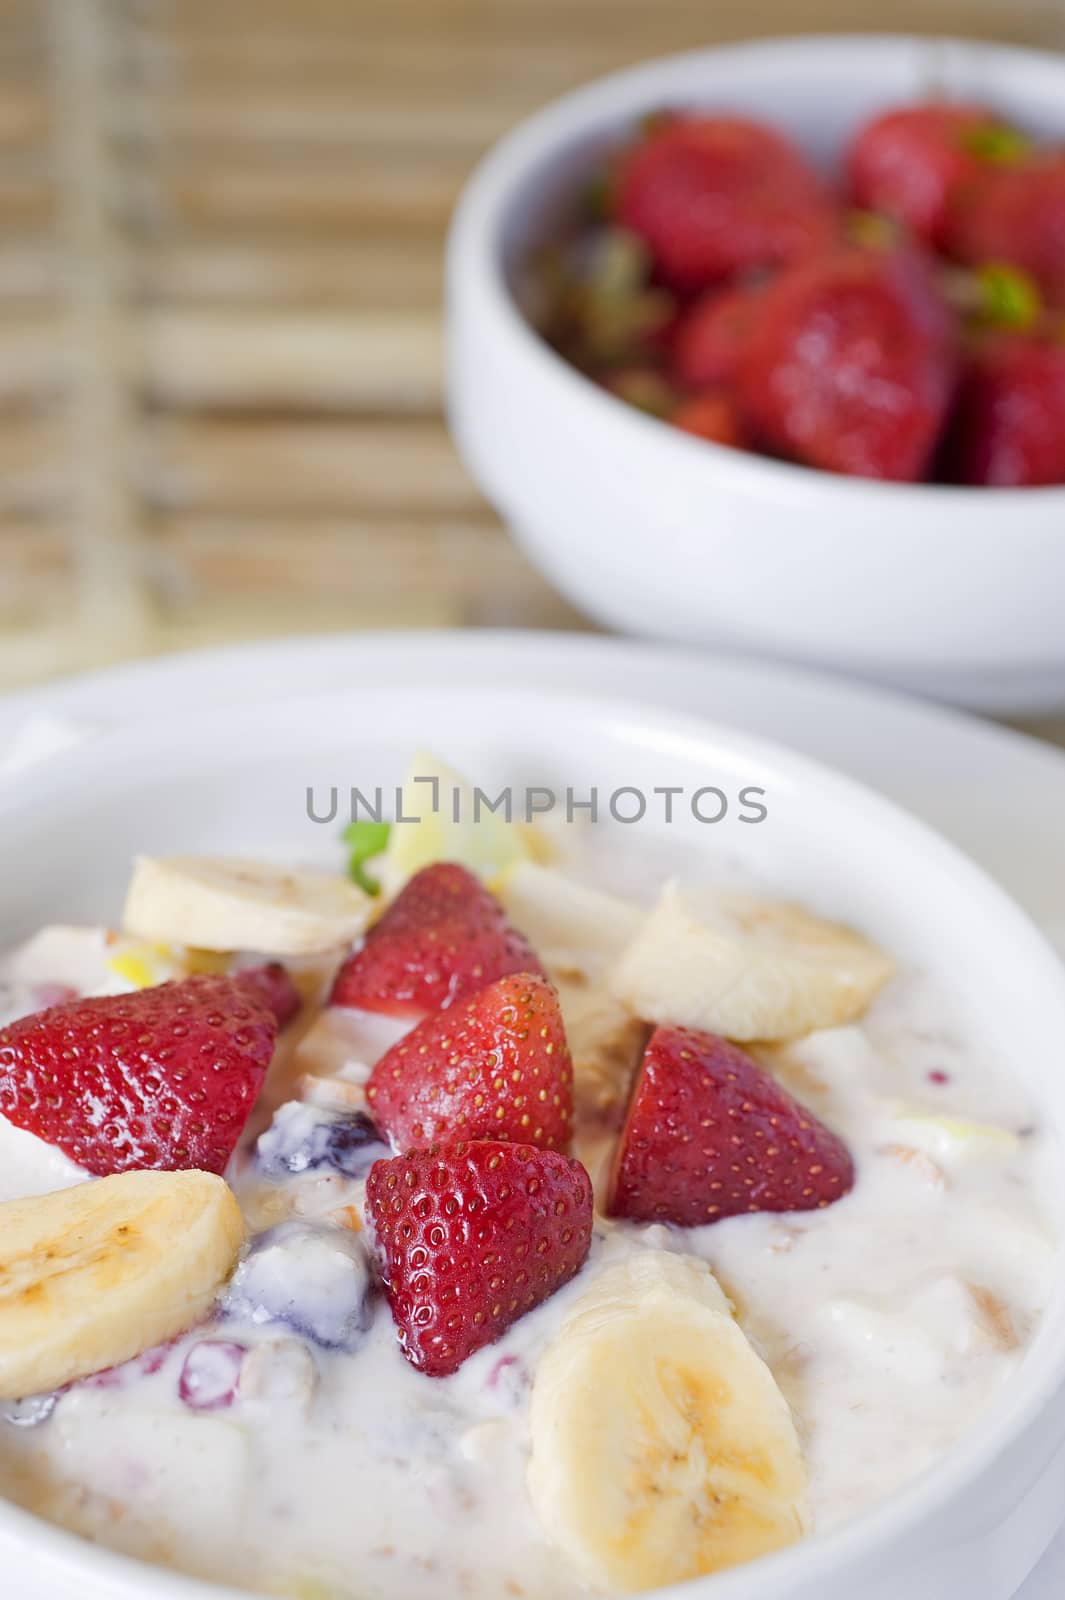 Fresh fruit salad in a white dish with fresh strawberries